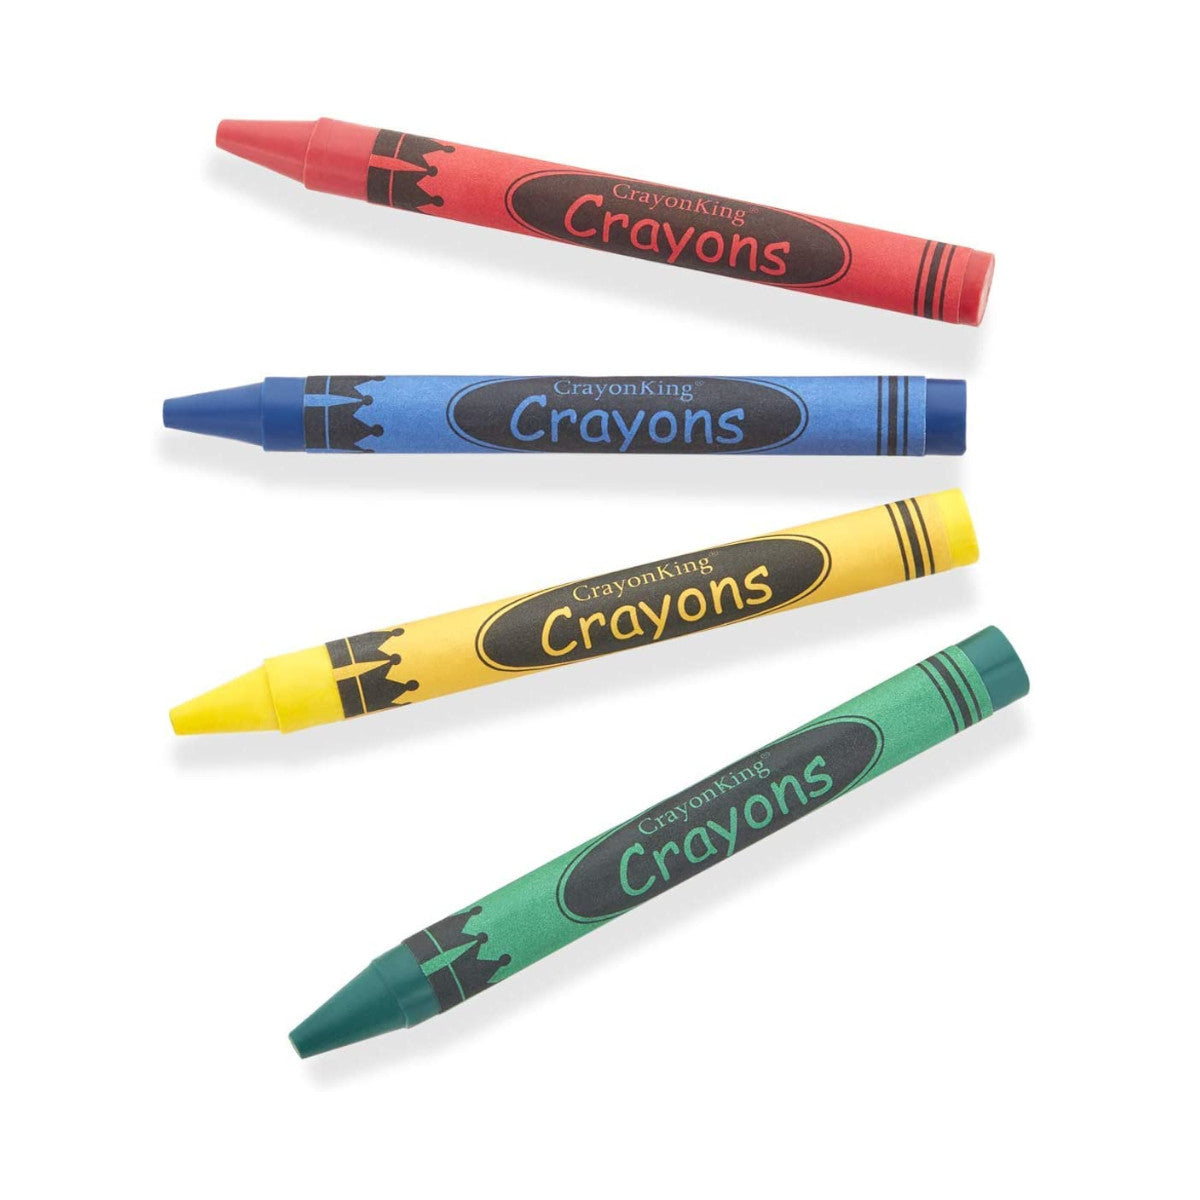 Imagine by Bendon Twist-Up Crayons Assorted Colors, 6 Pack